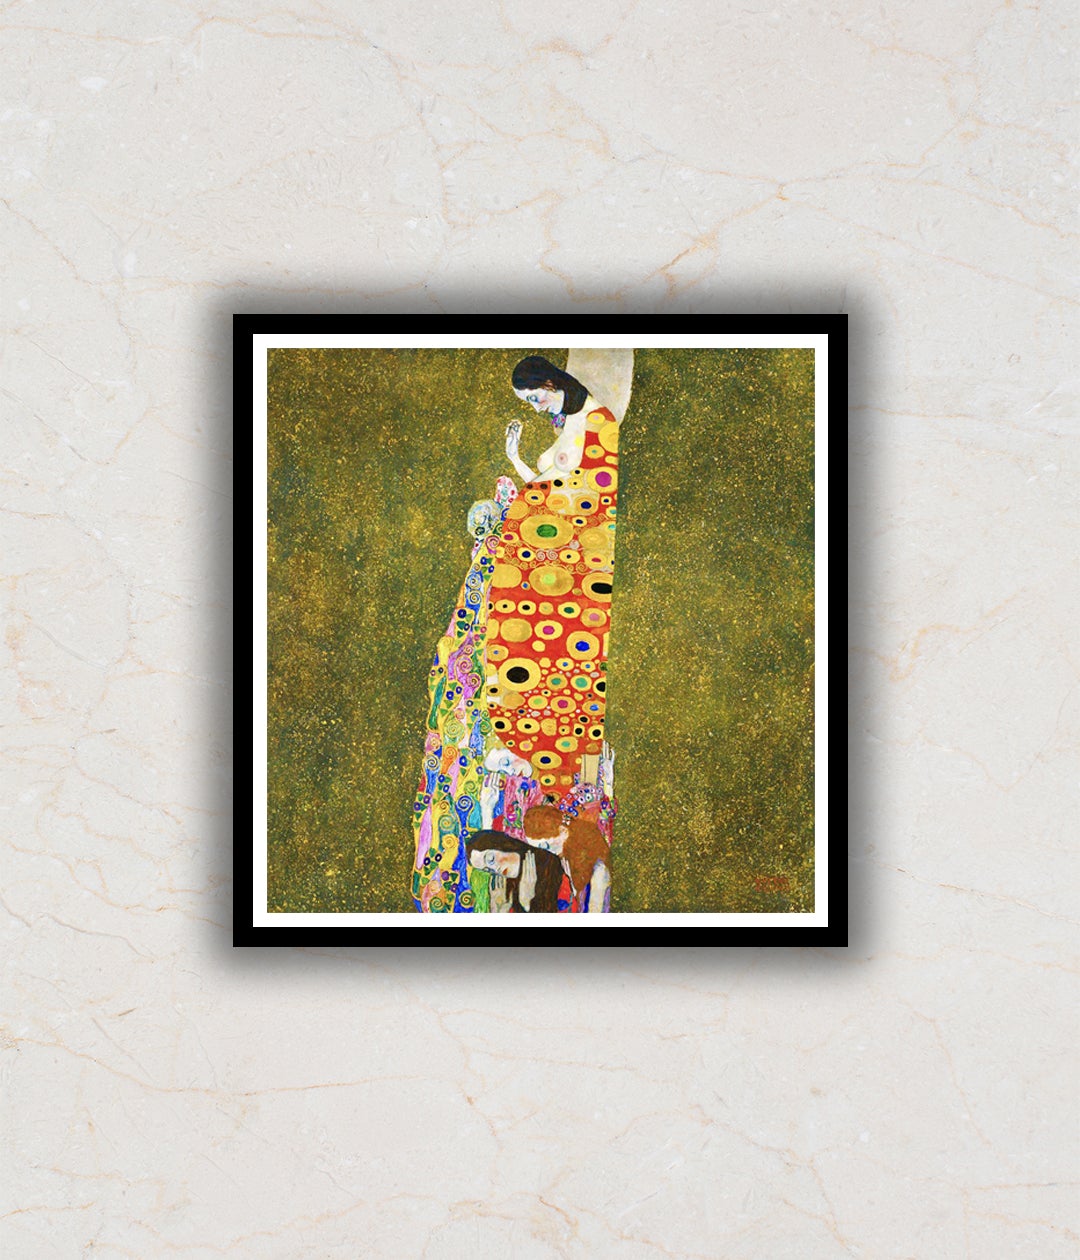 Hope By Gustav Klimt Modern Abstract Painting Artwork For Home Wall DŽcor